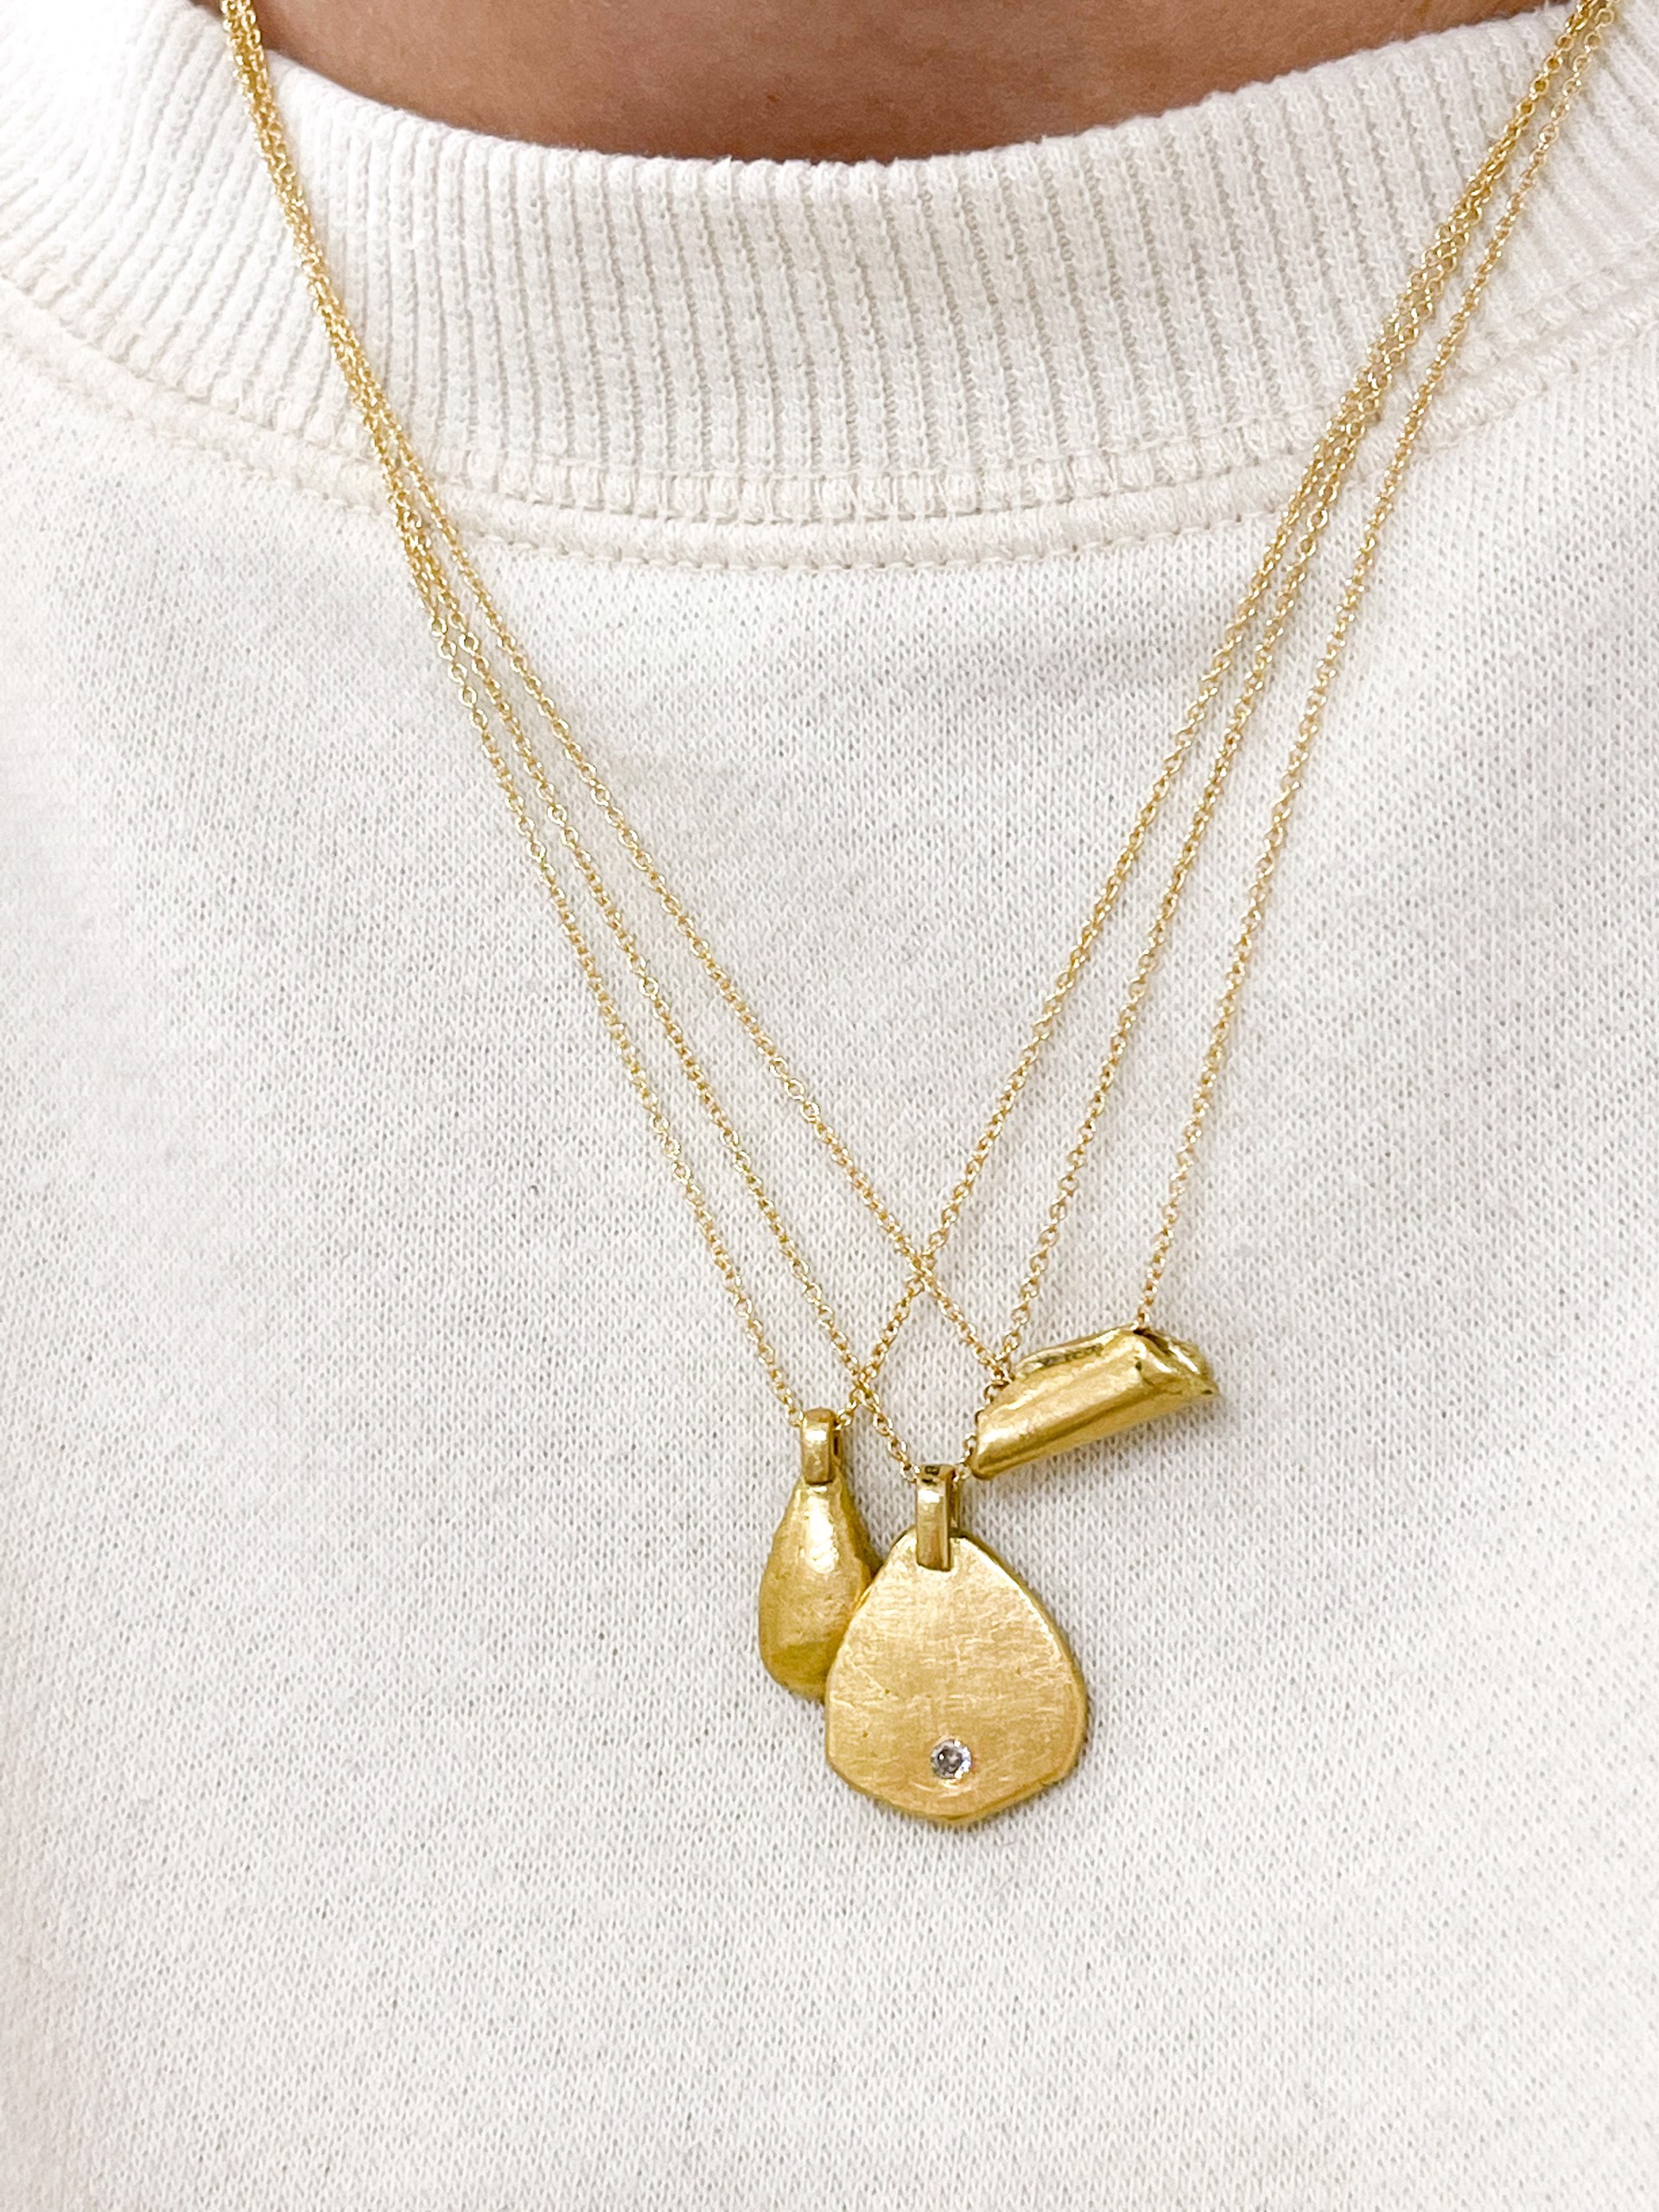 LHN05- Flat Leaf with Diamond Necklace 18k gold by Leandra Hill